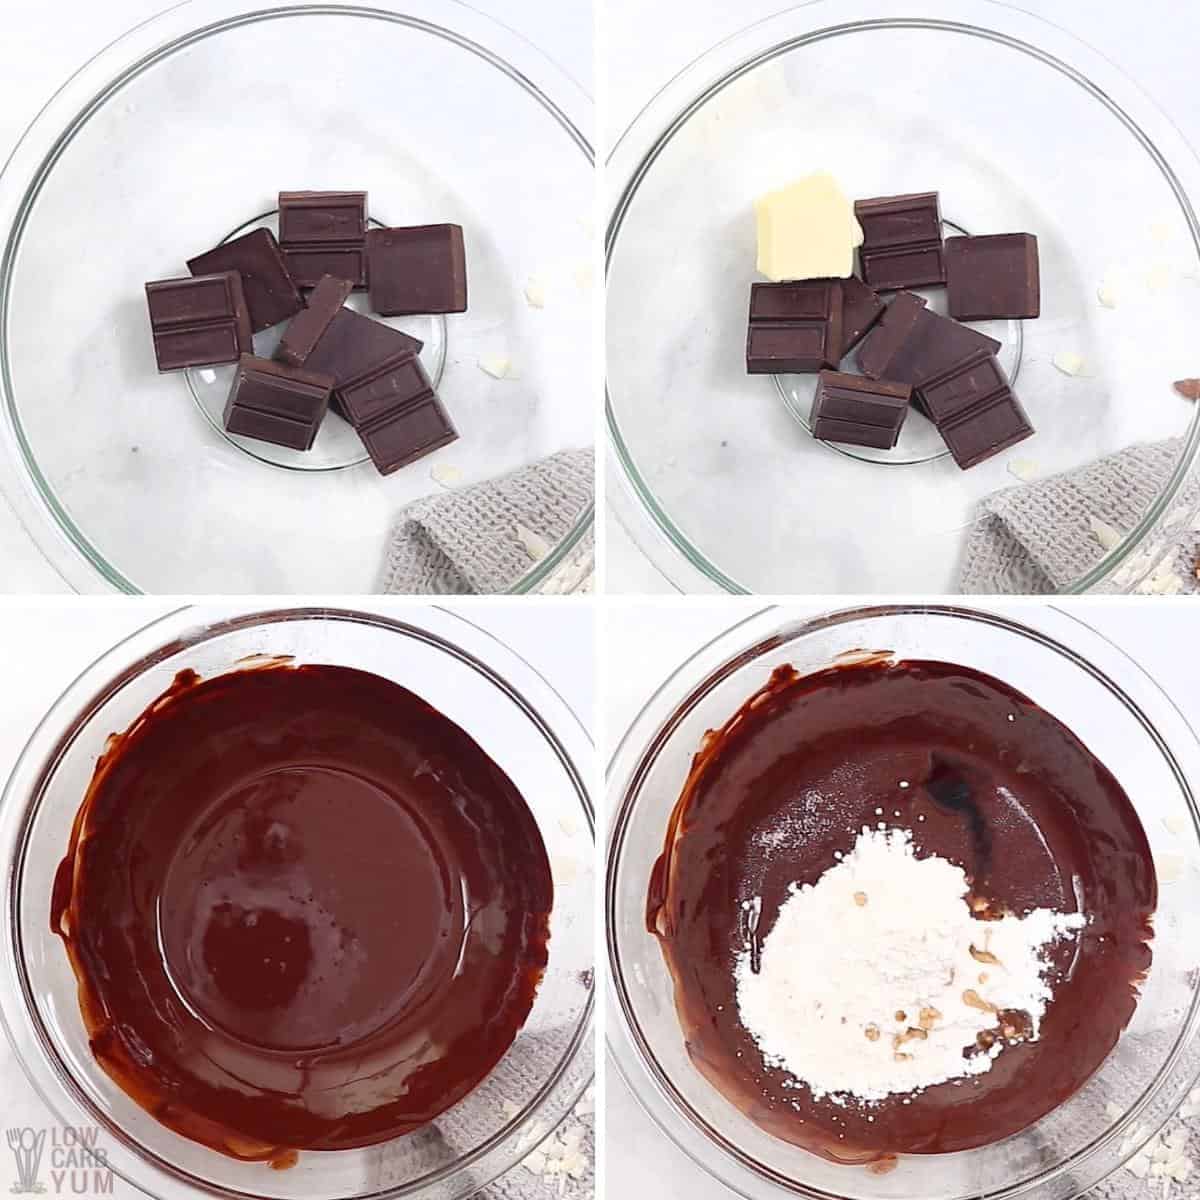 melting the chocolate with butter and adding sweetener.